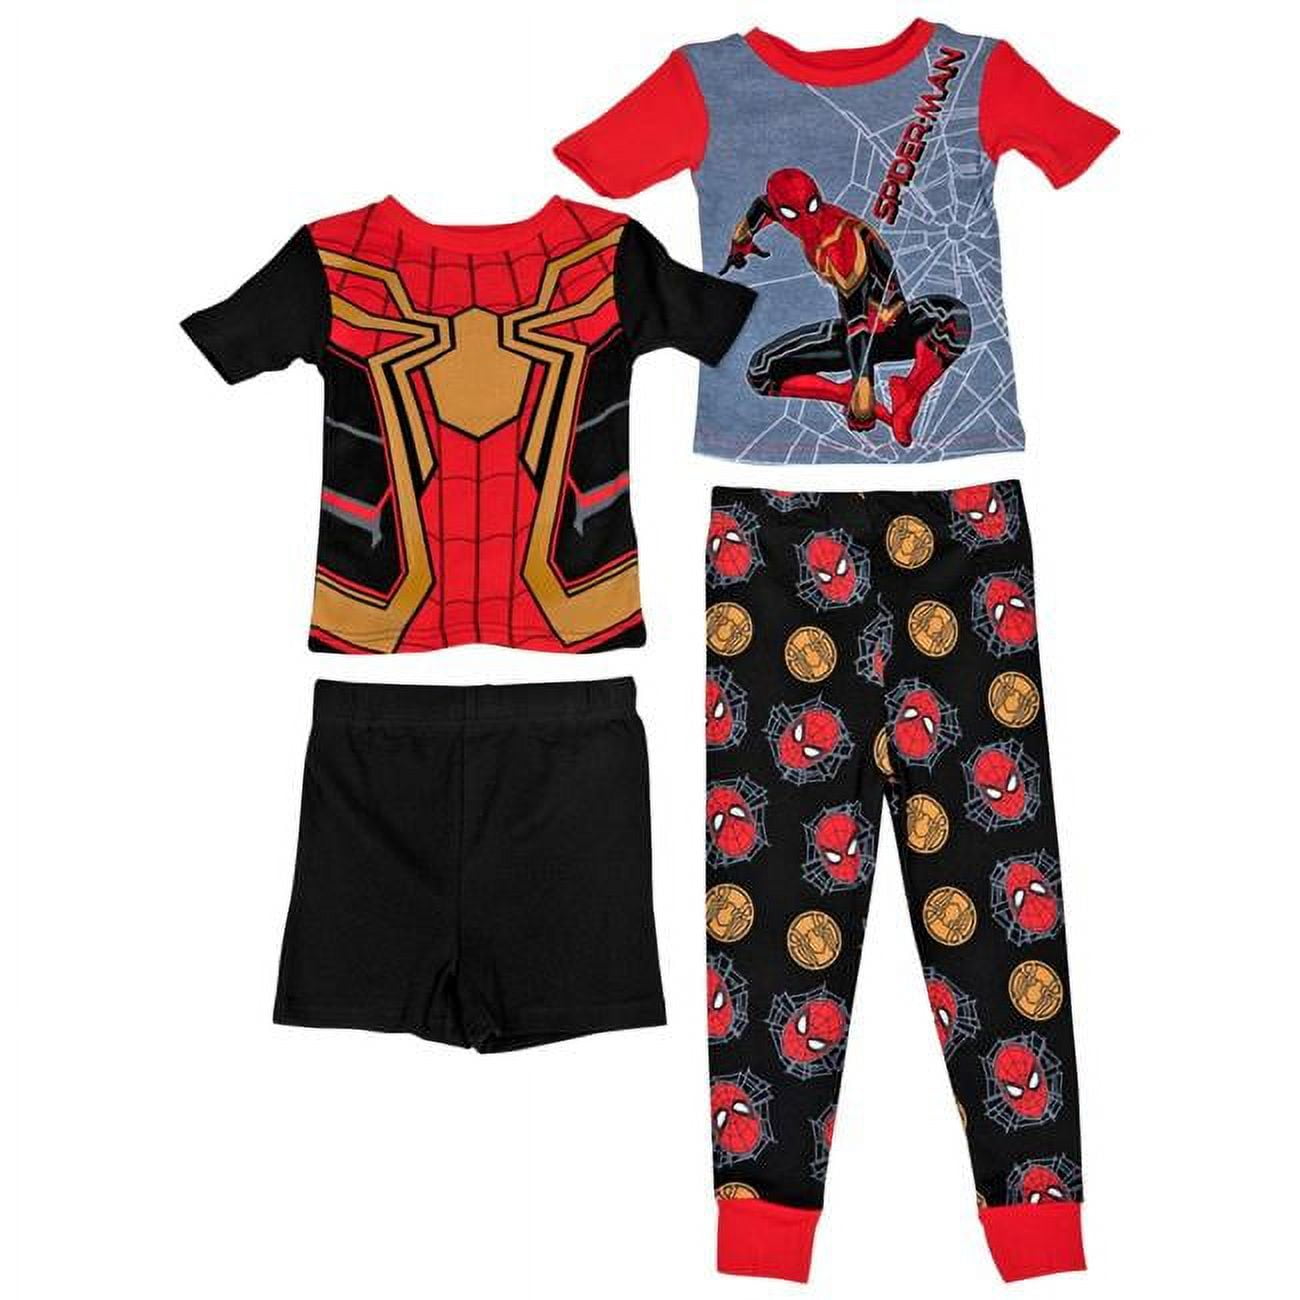 New Flannel Spiderman Pajamas Adult Spider Man Costume Clothes One-piece  Nightgown Women's Home Hooded Sleepwear